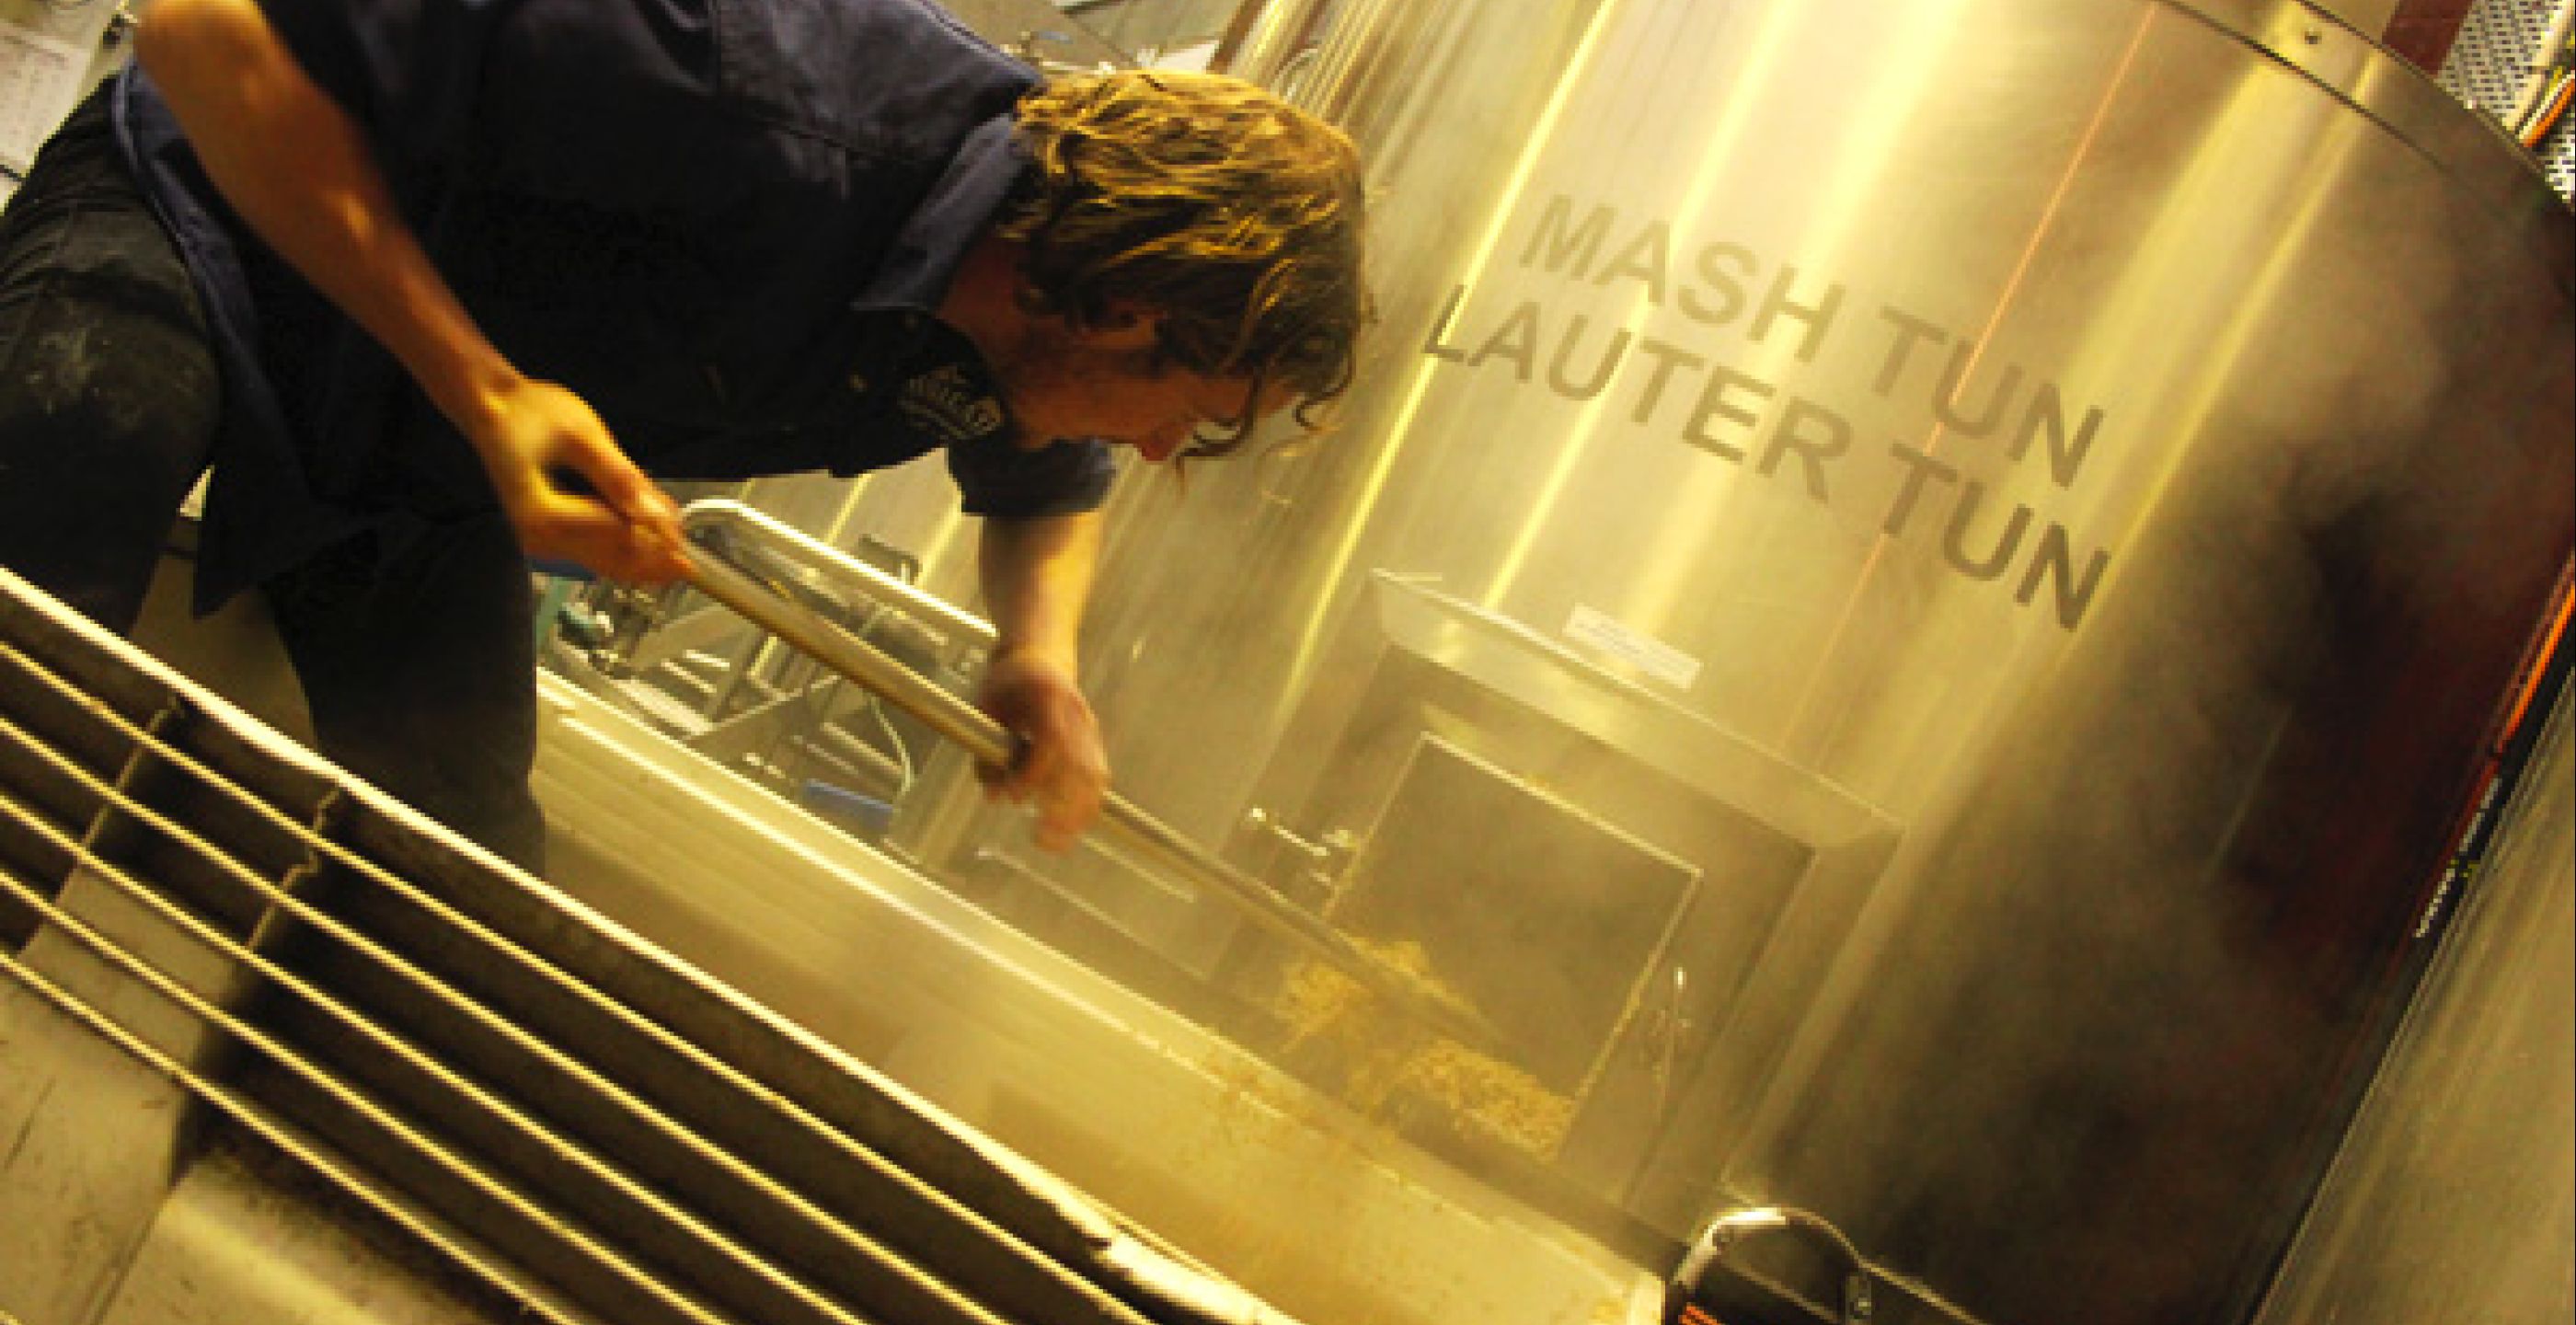 Ask Brewer Jayne: Getting into the brewing industry